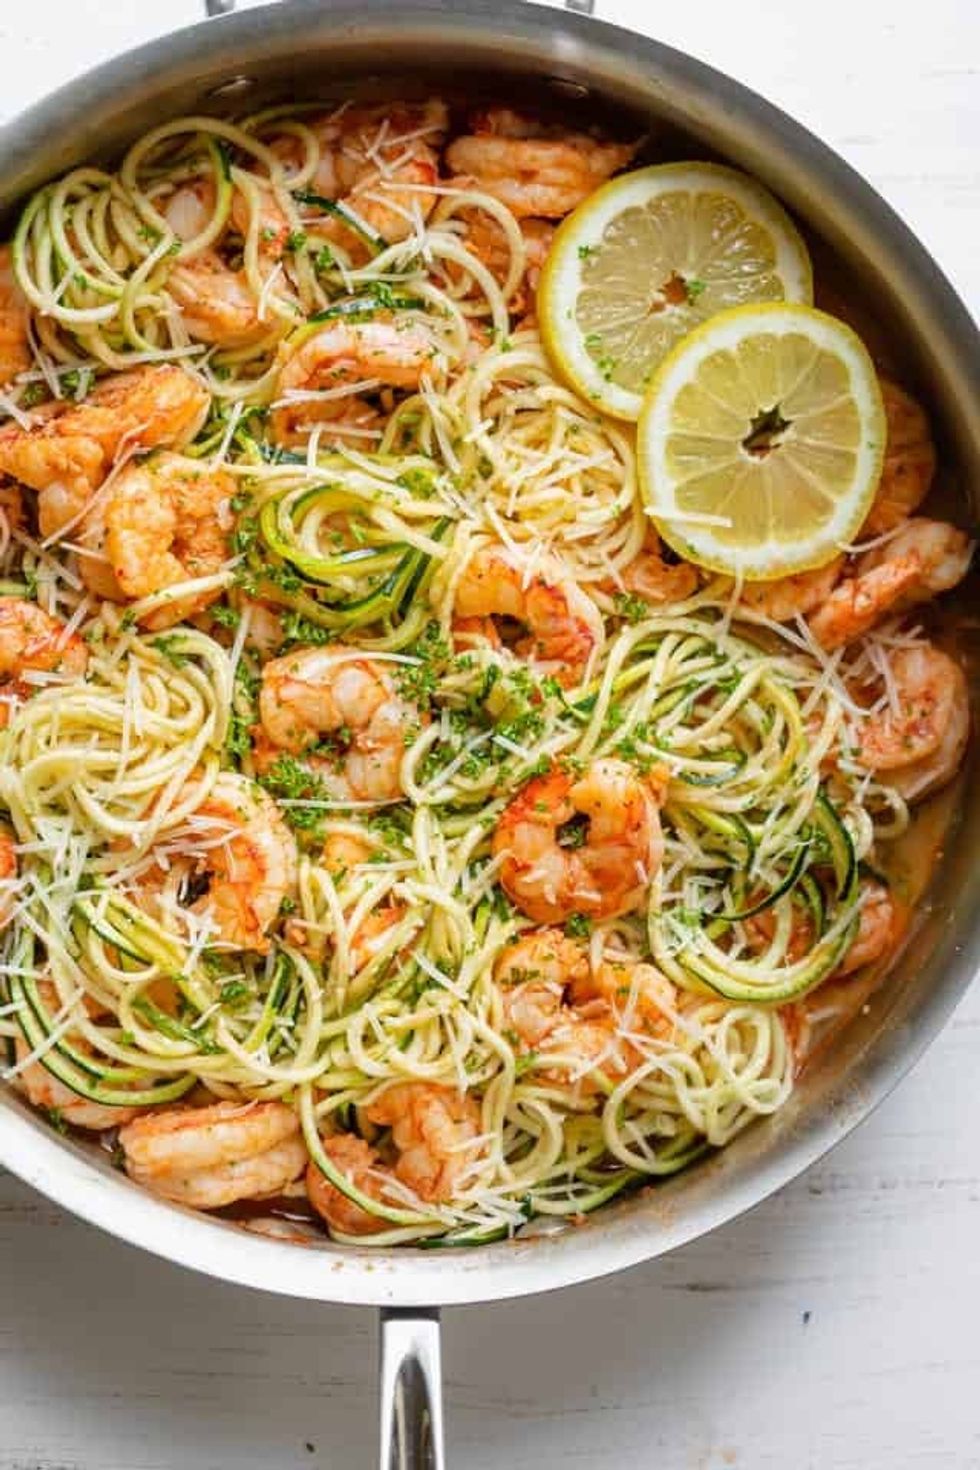 https://www.brit.co/media-library/shrimp-scampi-with-zoodles.jpg?id=34117684&width=980